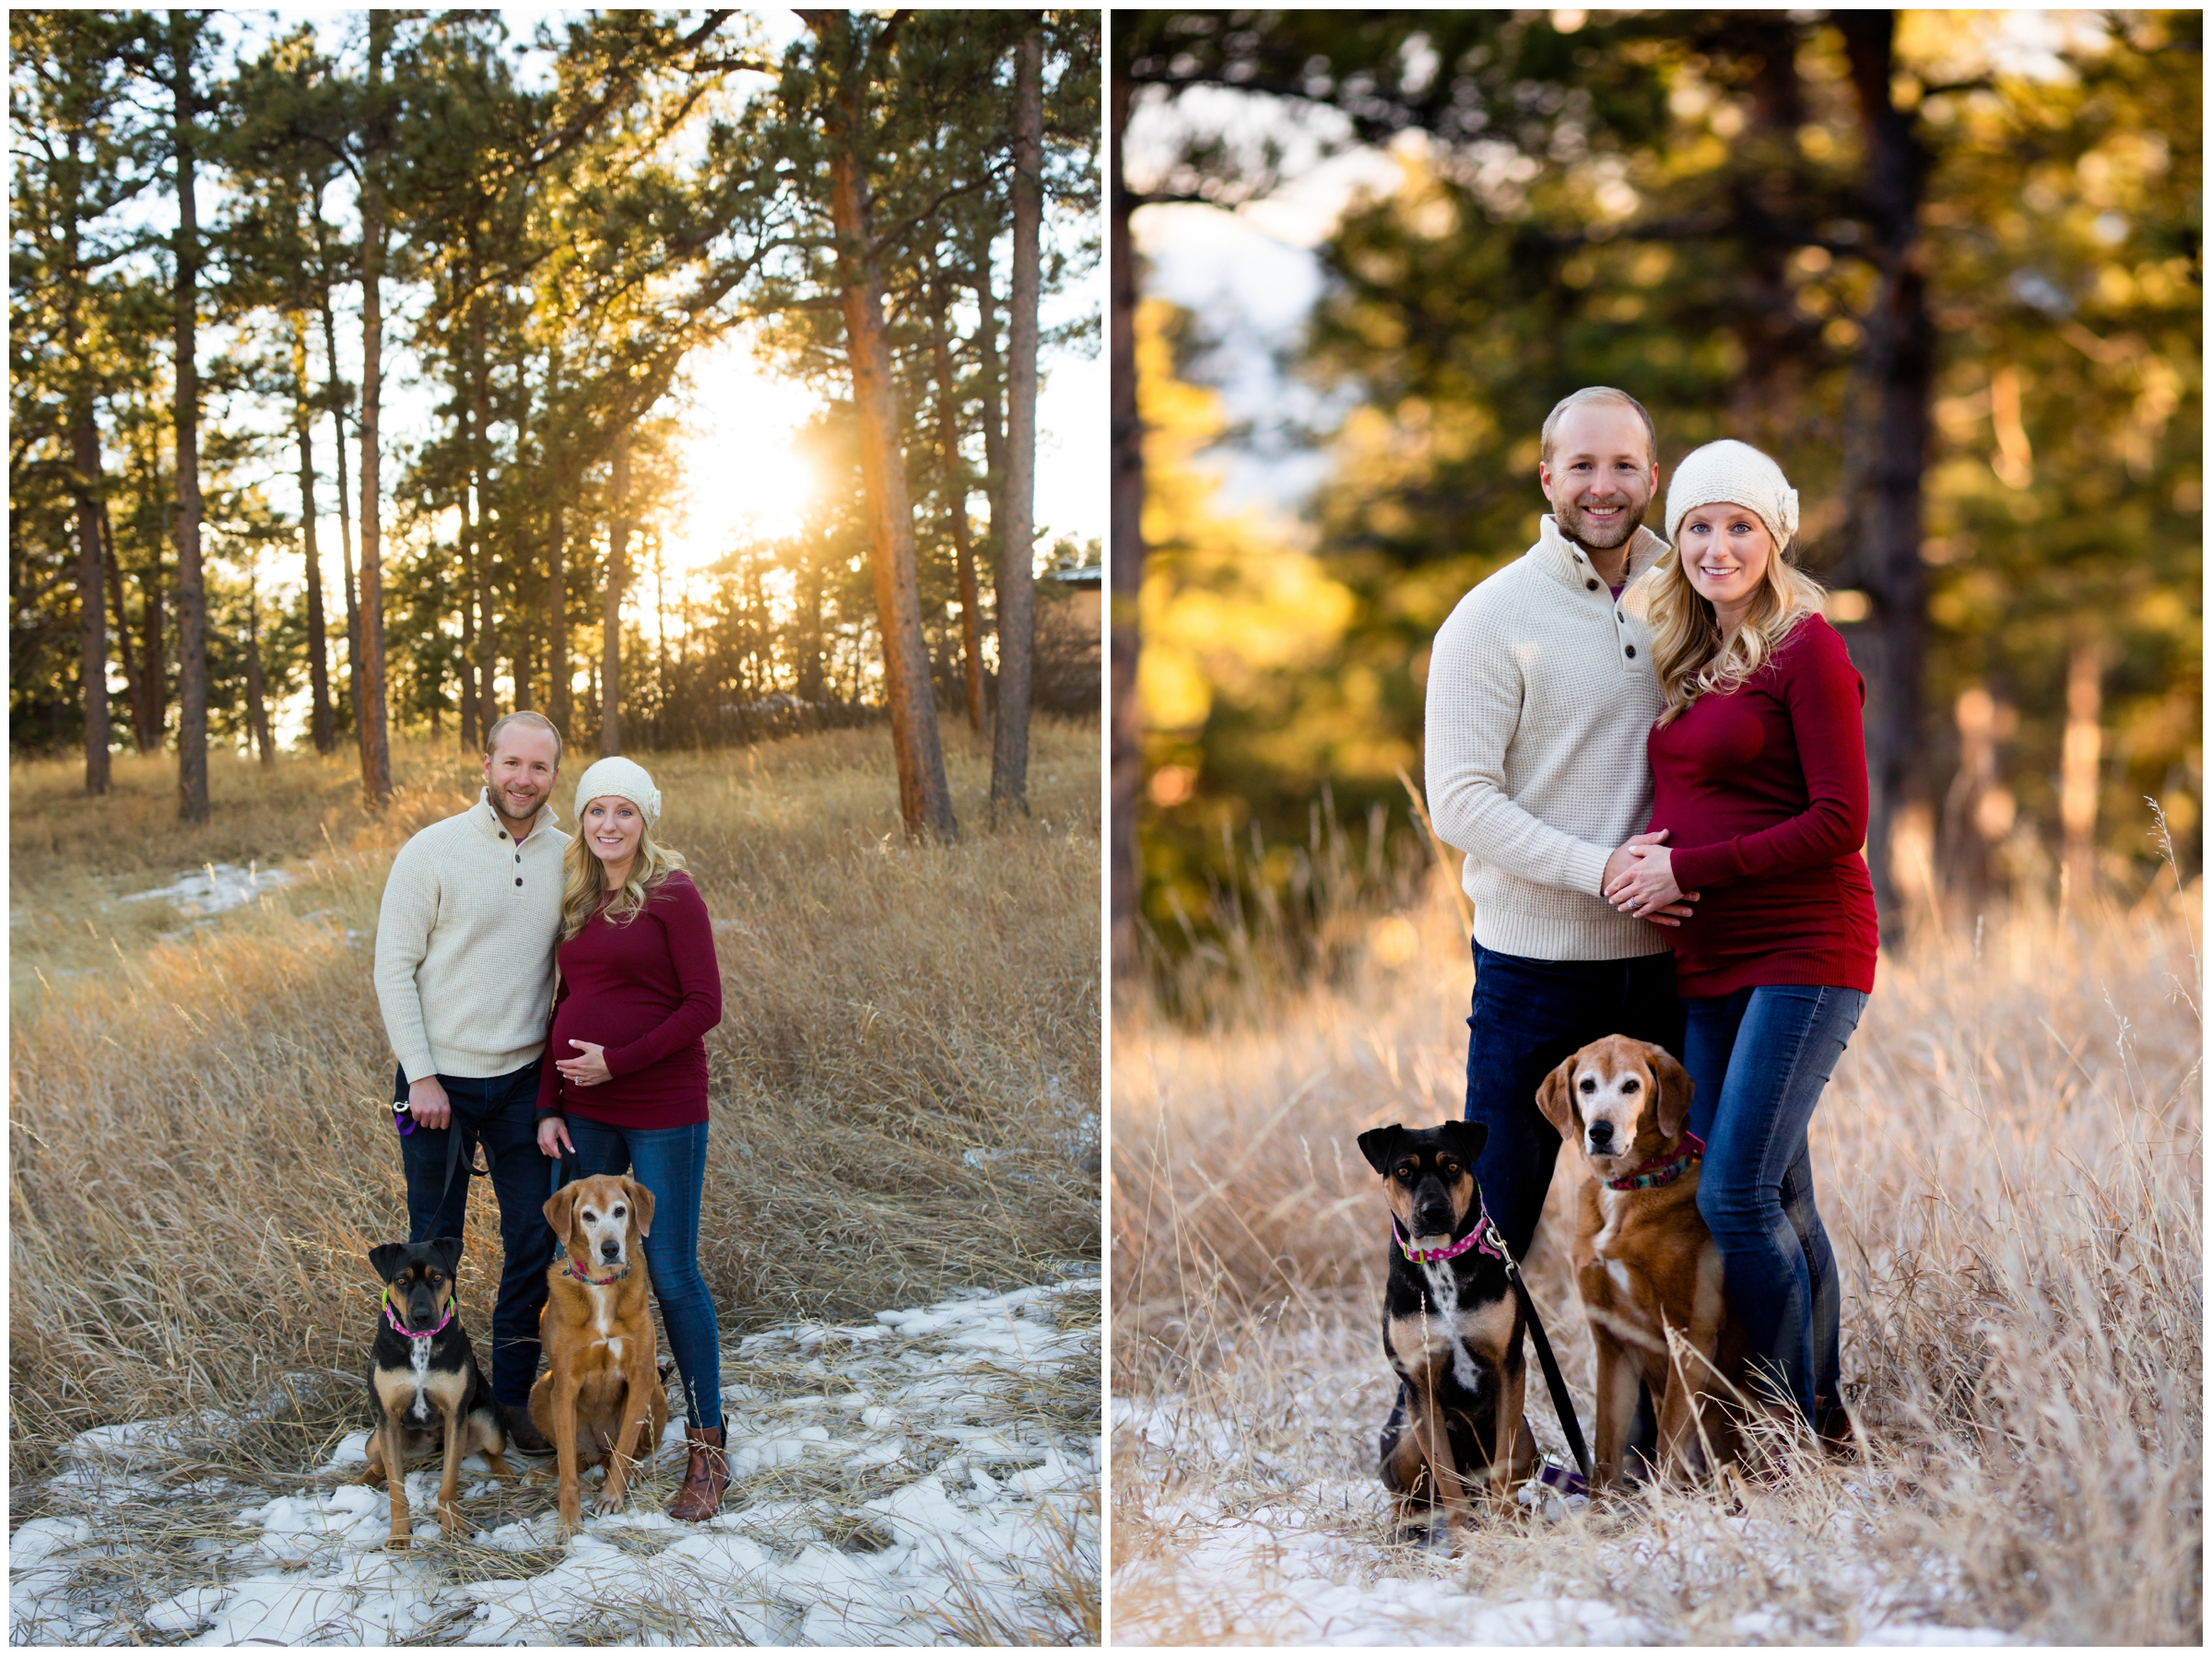 Golden maternity photos with dogs by Colorado photographer Plum Pretty photo 